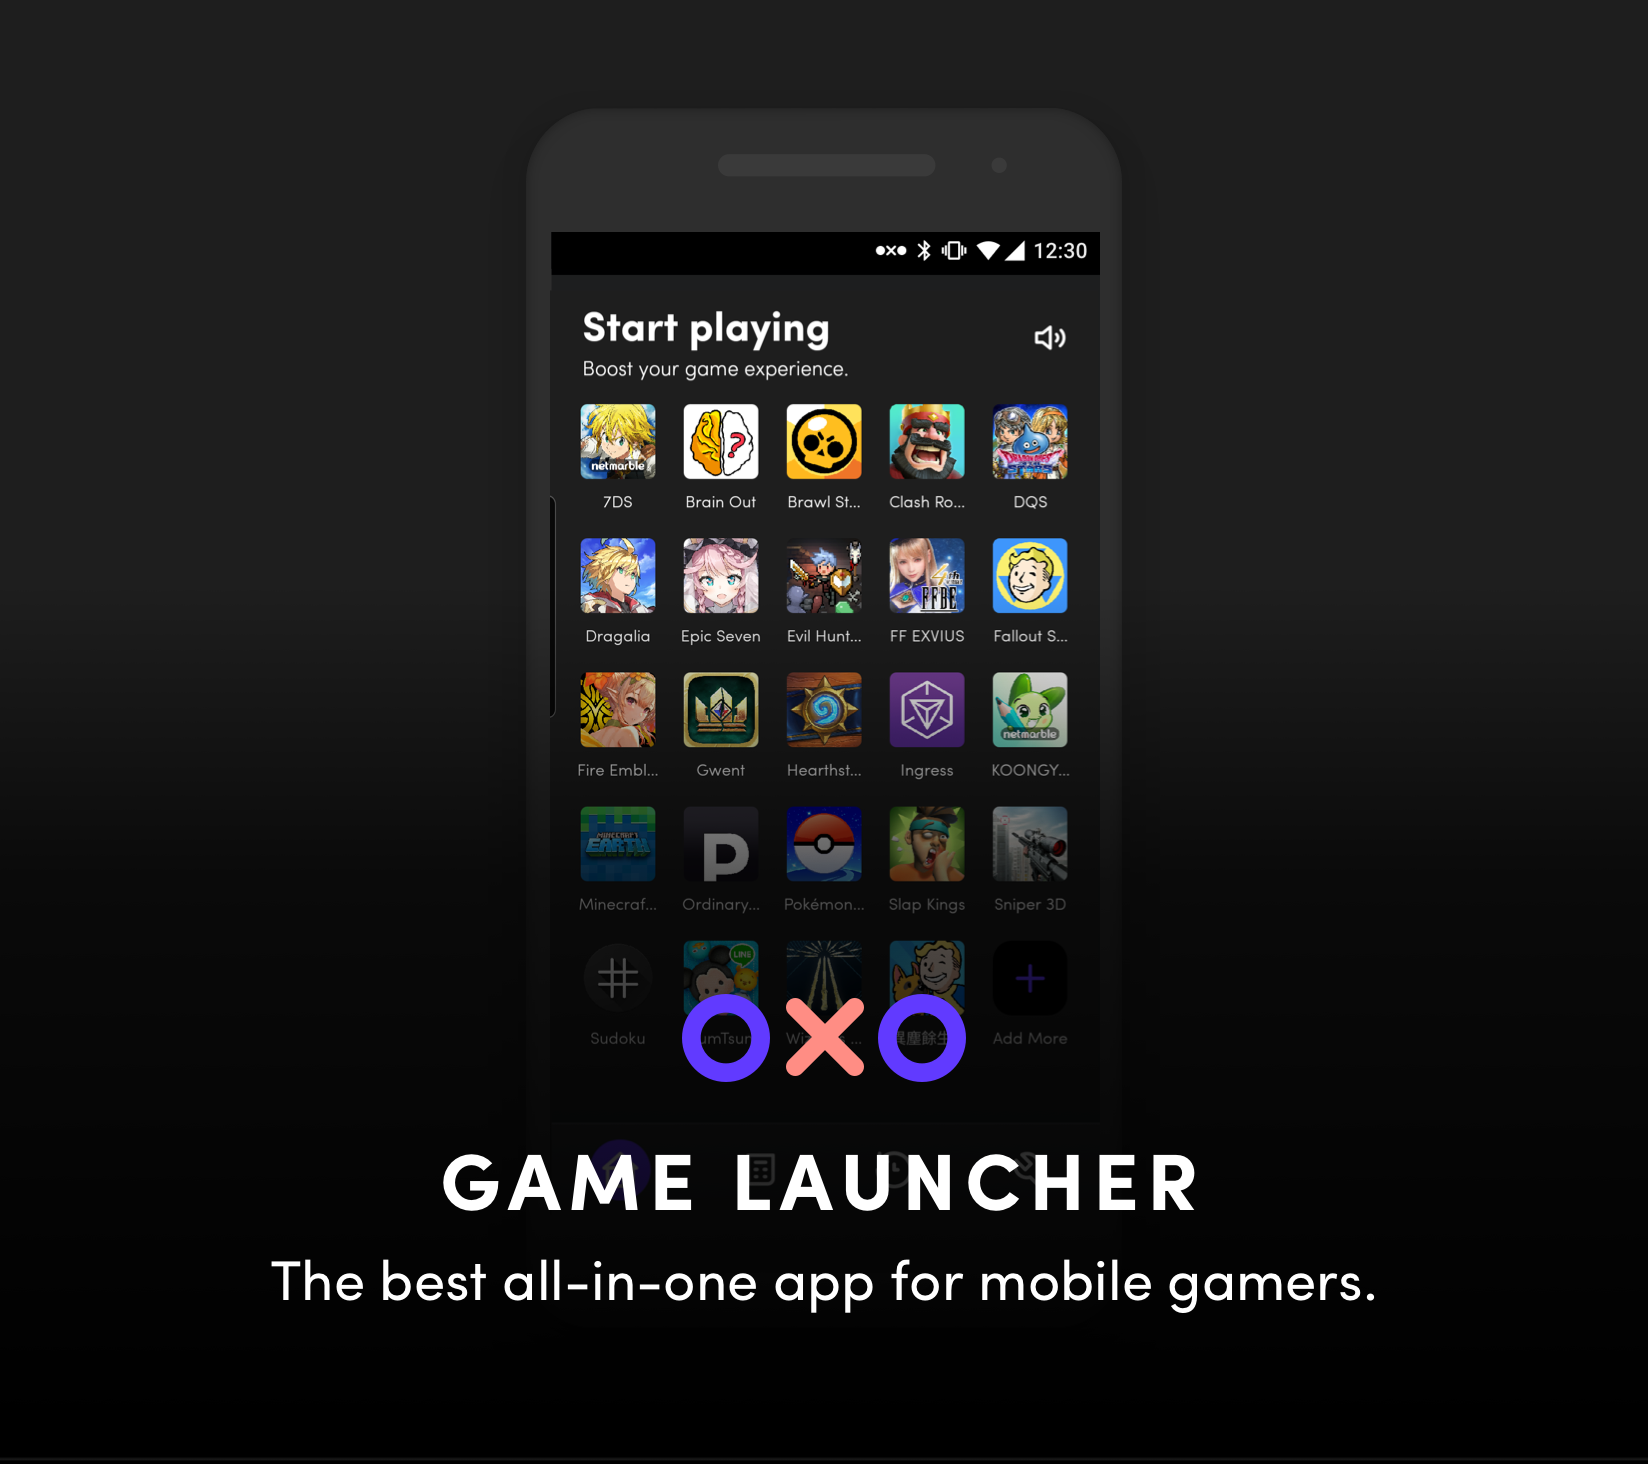 Zombie Launcher  Free Online Math Games, Cool Puzzles, and More